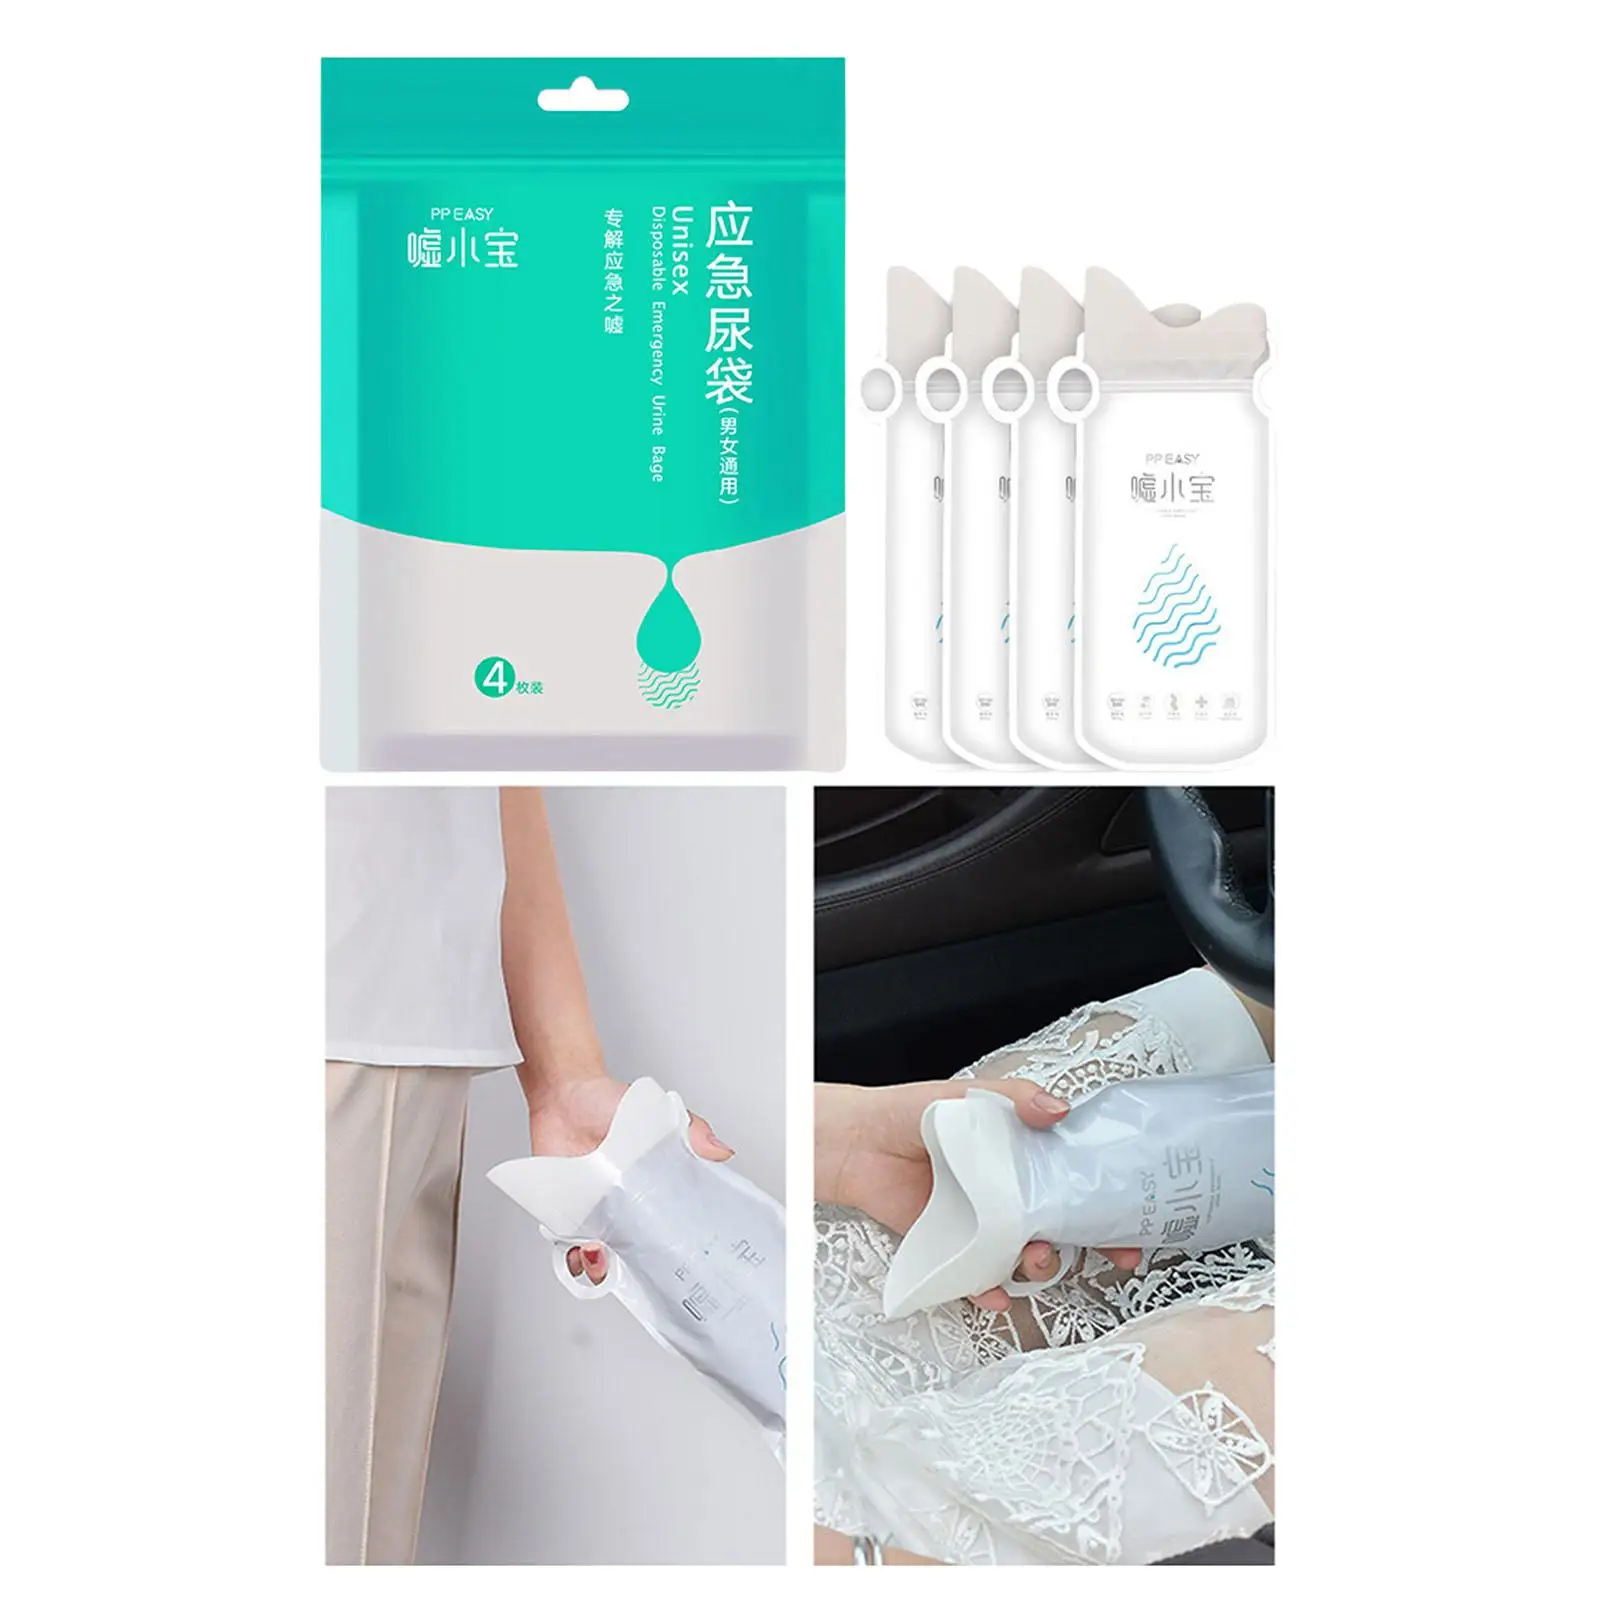 4Pcs Disposable Urinal Bags Unisex Fit for Emergency Car Sickness Travel